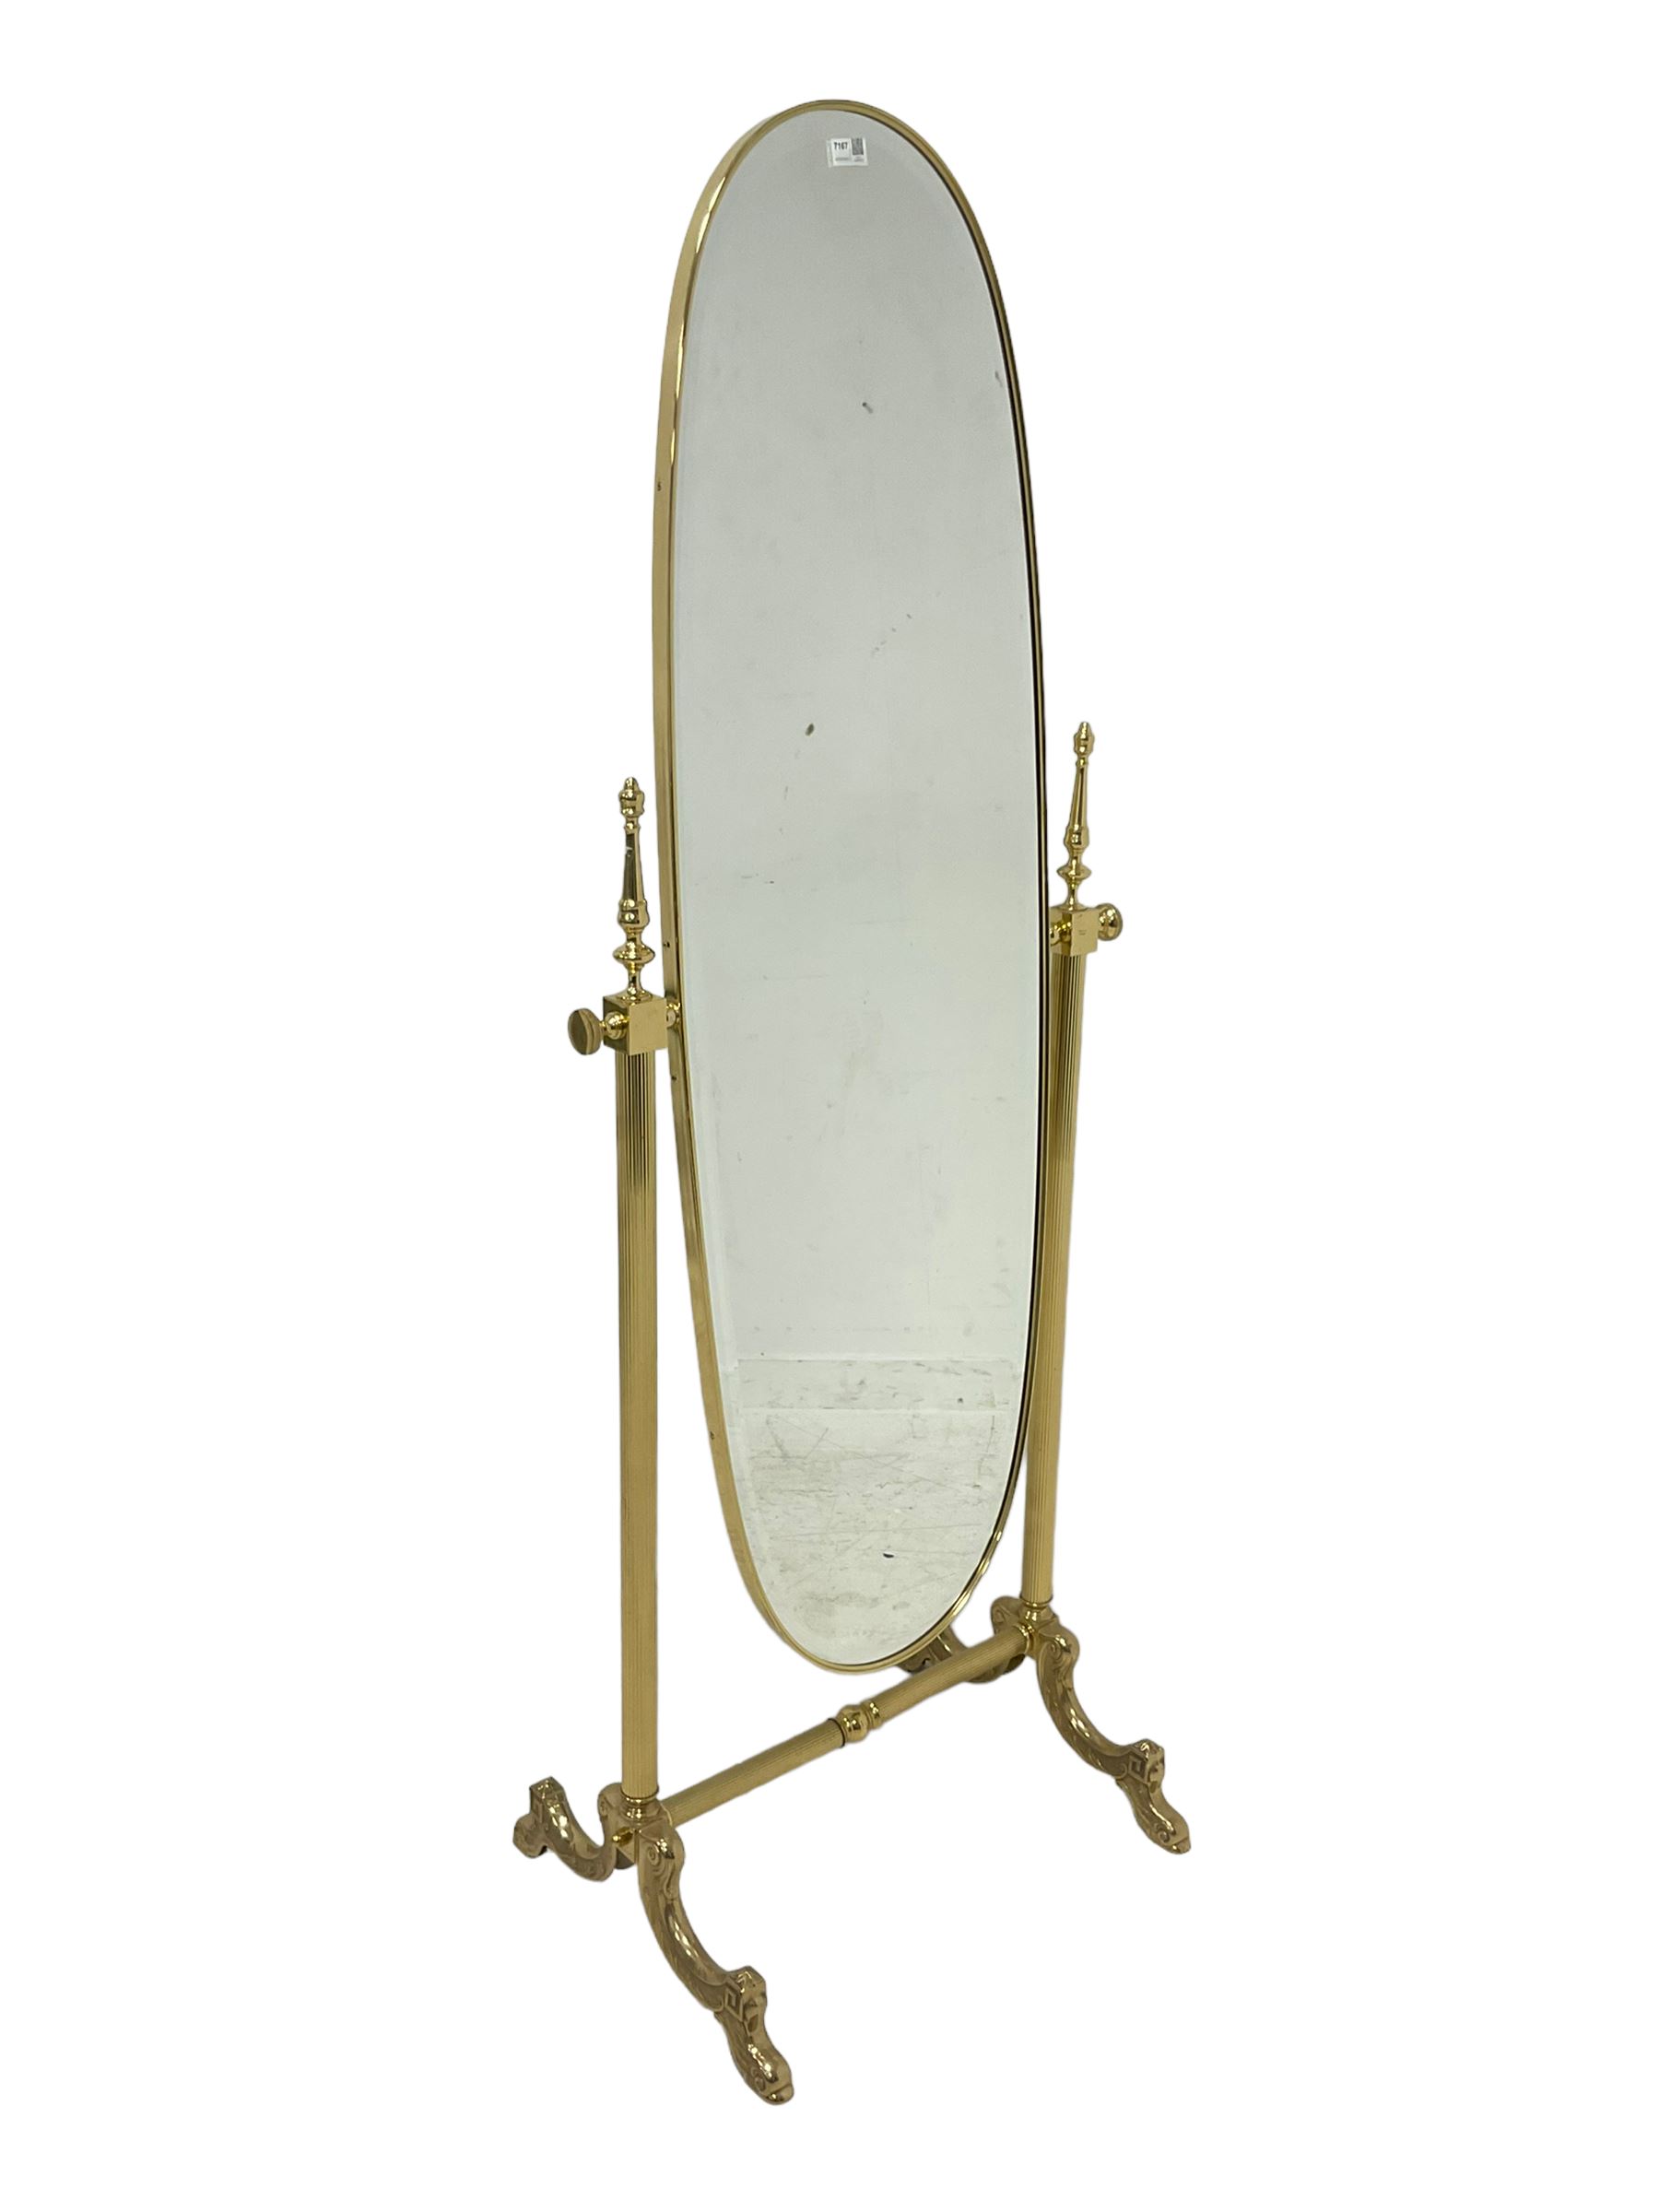 French style gilt metal oval swing cheval dressing mirror